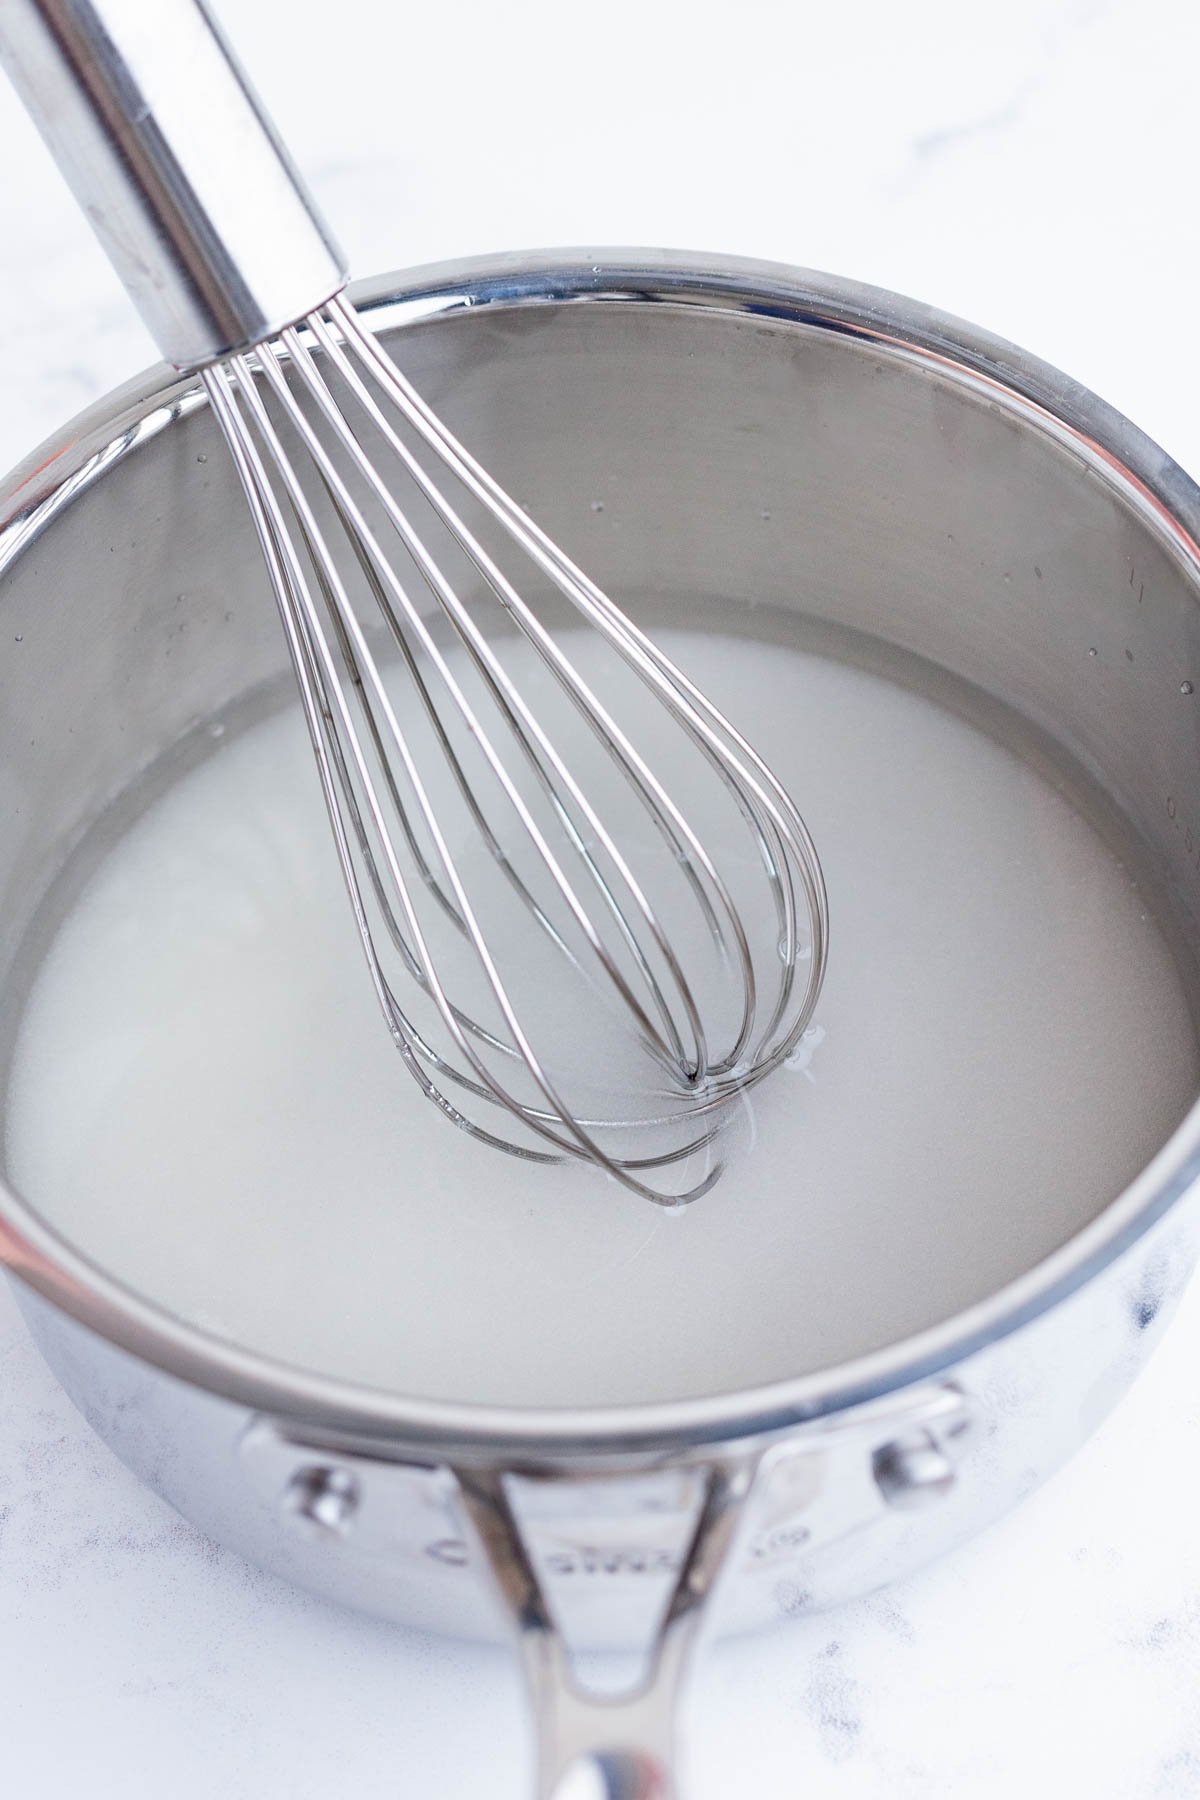 Sugar and water are added to a saucepan.